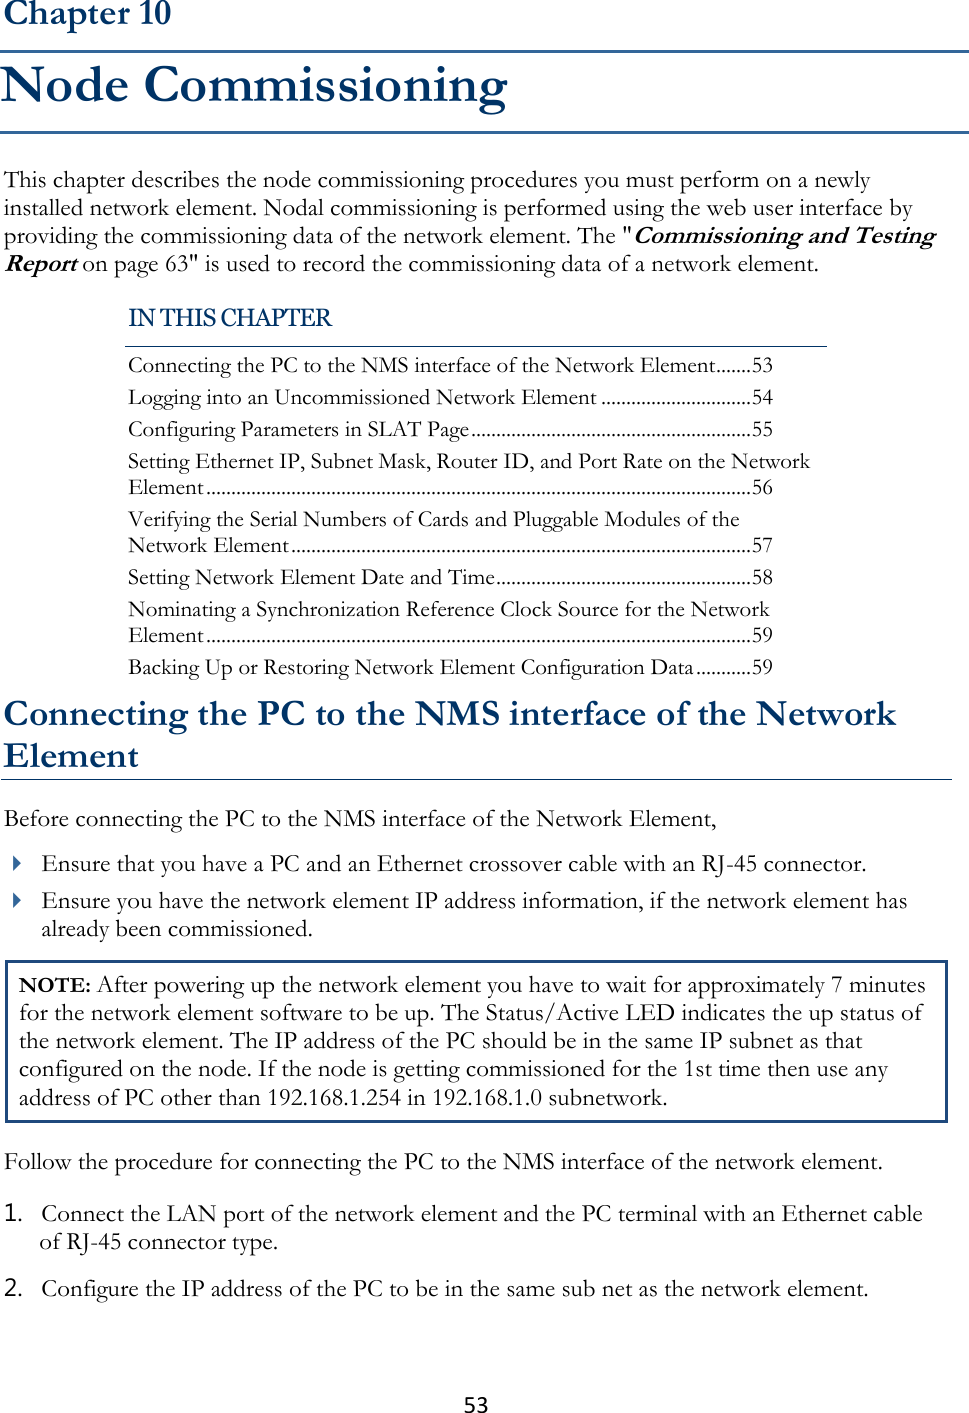 53  This chapter describes the node commissioning procedures you must perform on a newly installed network element. Nodal commissioning is performed using the web user interface by providing the commissioning data of the network element. The &quot;Commissioning and Testing Report on page 63&quot; is used to record the commissioning data of a network element. Connecting the PC to the NMS interface of the Network Element Before connecting the PC to the NMS interface of the Network Element,  Ensure that you have a PC and an Ethernet crossover cable with an RJ-45 connector.   Ensure you have the network element IP address information, if the network element has already been commissioned. NOTE: After powering up the network element you have to wait for approximately 7 minutes for the network element software to be up. The Status/Active LED indicates the up status of the network element. The IP address of the PC should be in the same IP subnet as that configured on the node. If the node is getting commissioned for the 1st time then use any address of PC other than 192.168.1.254 in 192.168.1.0 subnetwork. Follow the procedure for connecting the PC to the NMS interface of the network element. 1. Connect the LAN port of the network element and the PC terminal with an Ethernet cable of RJ-45 connector type. 2. Configure the IP address of the PC to be in the same sub net as the network element. Chapter 10 Node Commissioning IN THIS CHAPTER Connecting the PC to the NMS interface of the Network Element ....... 53 Logging into an Uncommissioned Network Element .............................. 54 Configuring Parameters in SLAT Page ........................................................ 55 Setting Ethernet IP, Subnet Mask, Router ID, and Port Rate on the Network Element ............................................................................................................. 56 Verifying the Serial Numbers of Cards and Pluggable Modules of the Network Element ............................................................................................ 57 Setting Network Element Date and Time ................................................... 58 Nominating a Synchronization Reference Clock Source for the Network Element ............................................................................................................. 59 Backing Up or Restoring Network Element Configuration Data ........... 59 